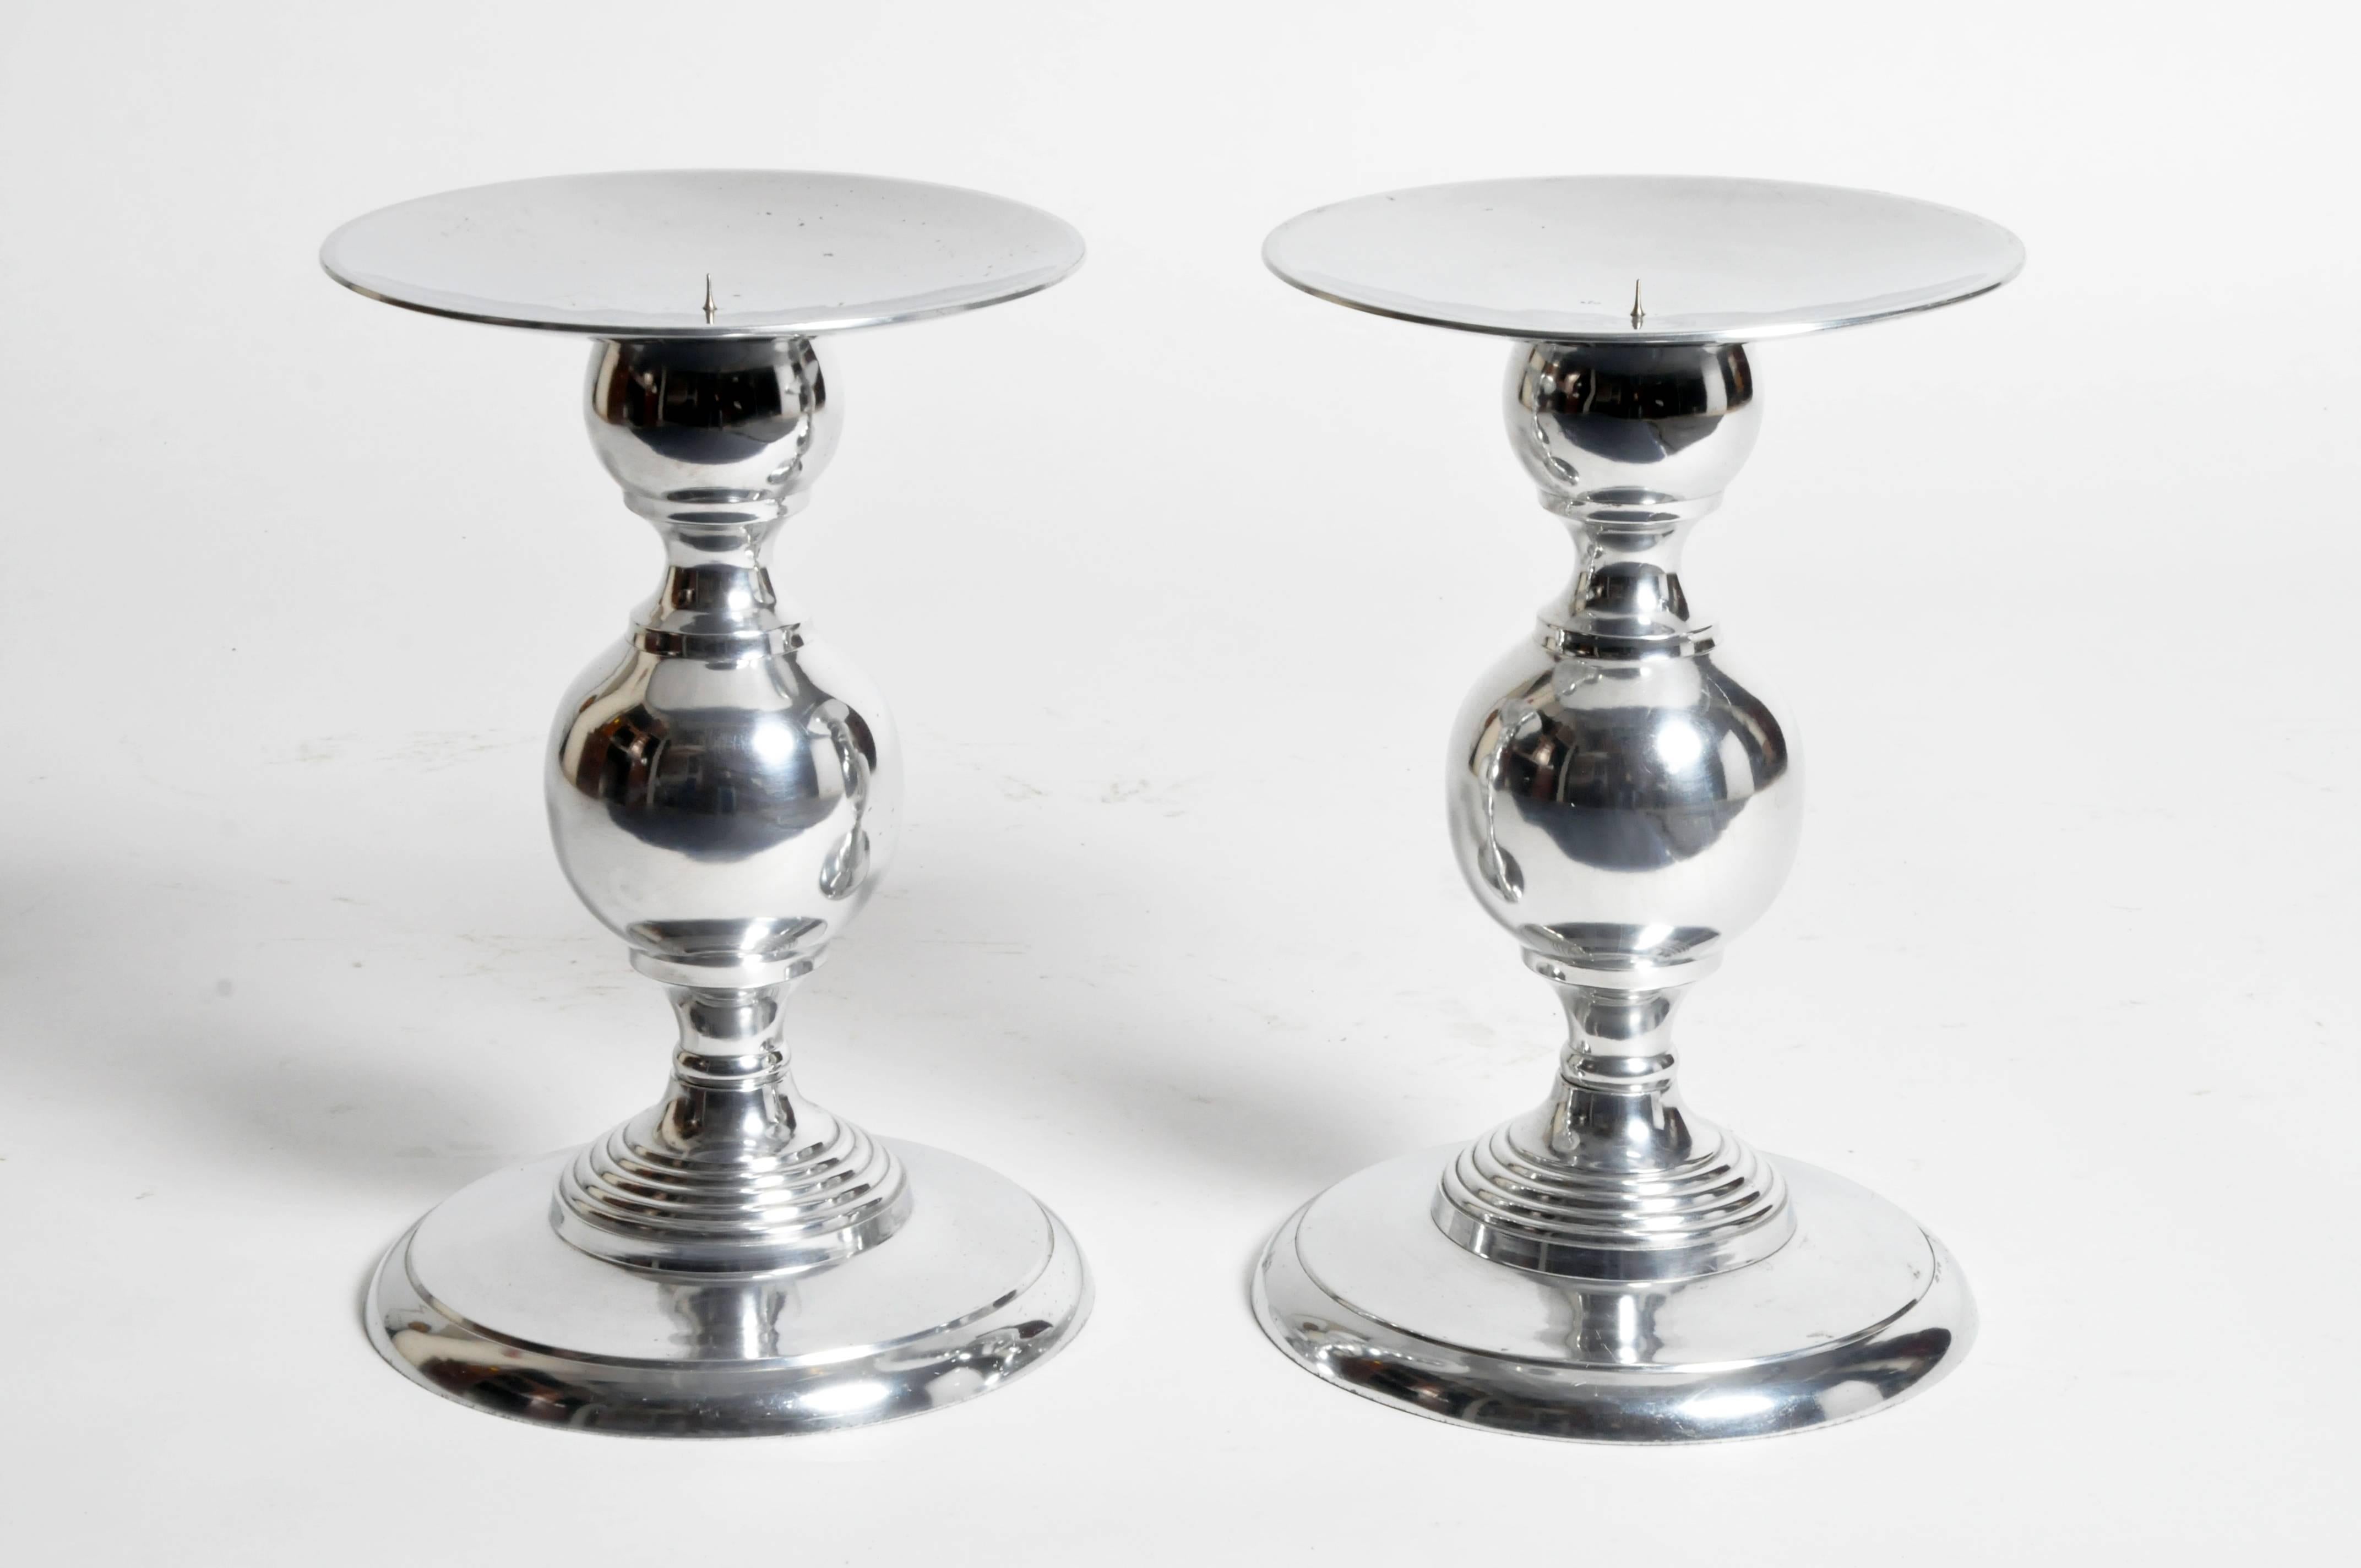 This elegant pair of candleholders are from Paris, France and they are newly made.